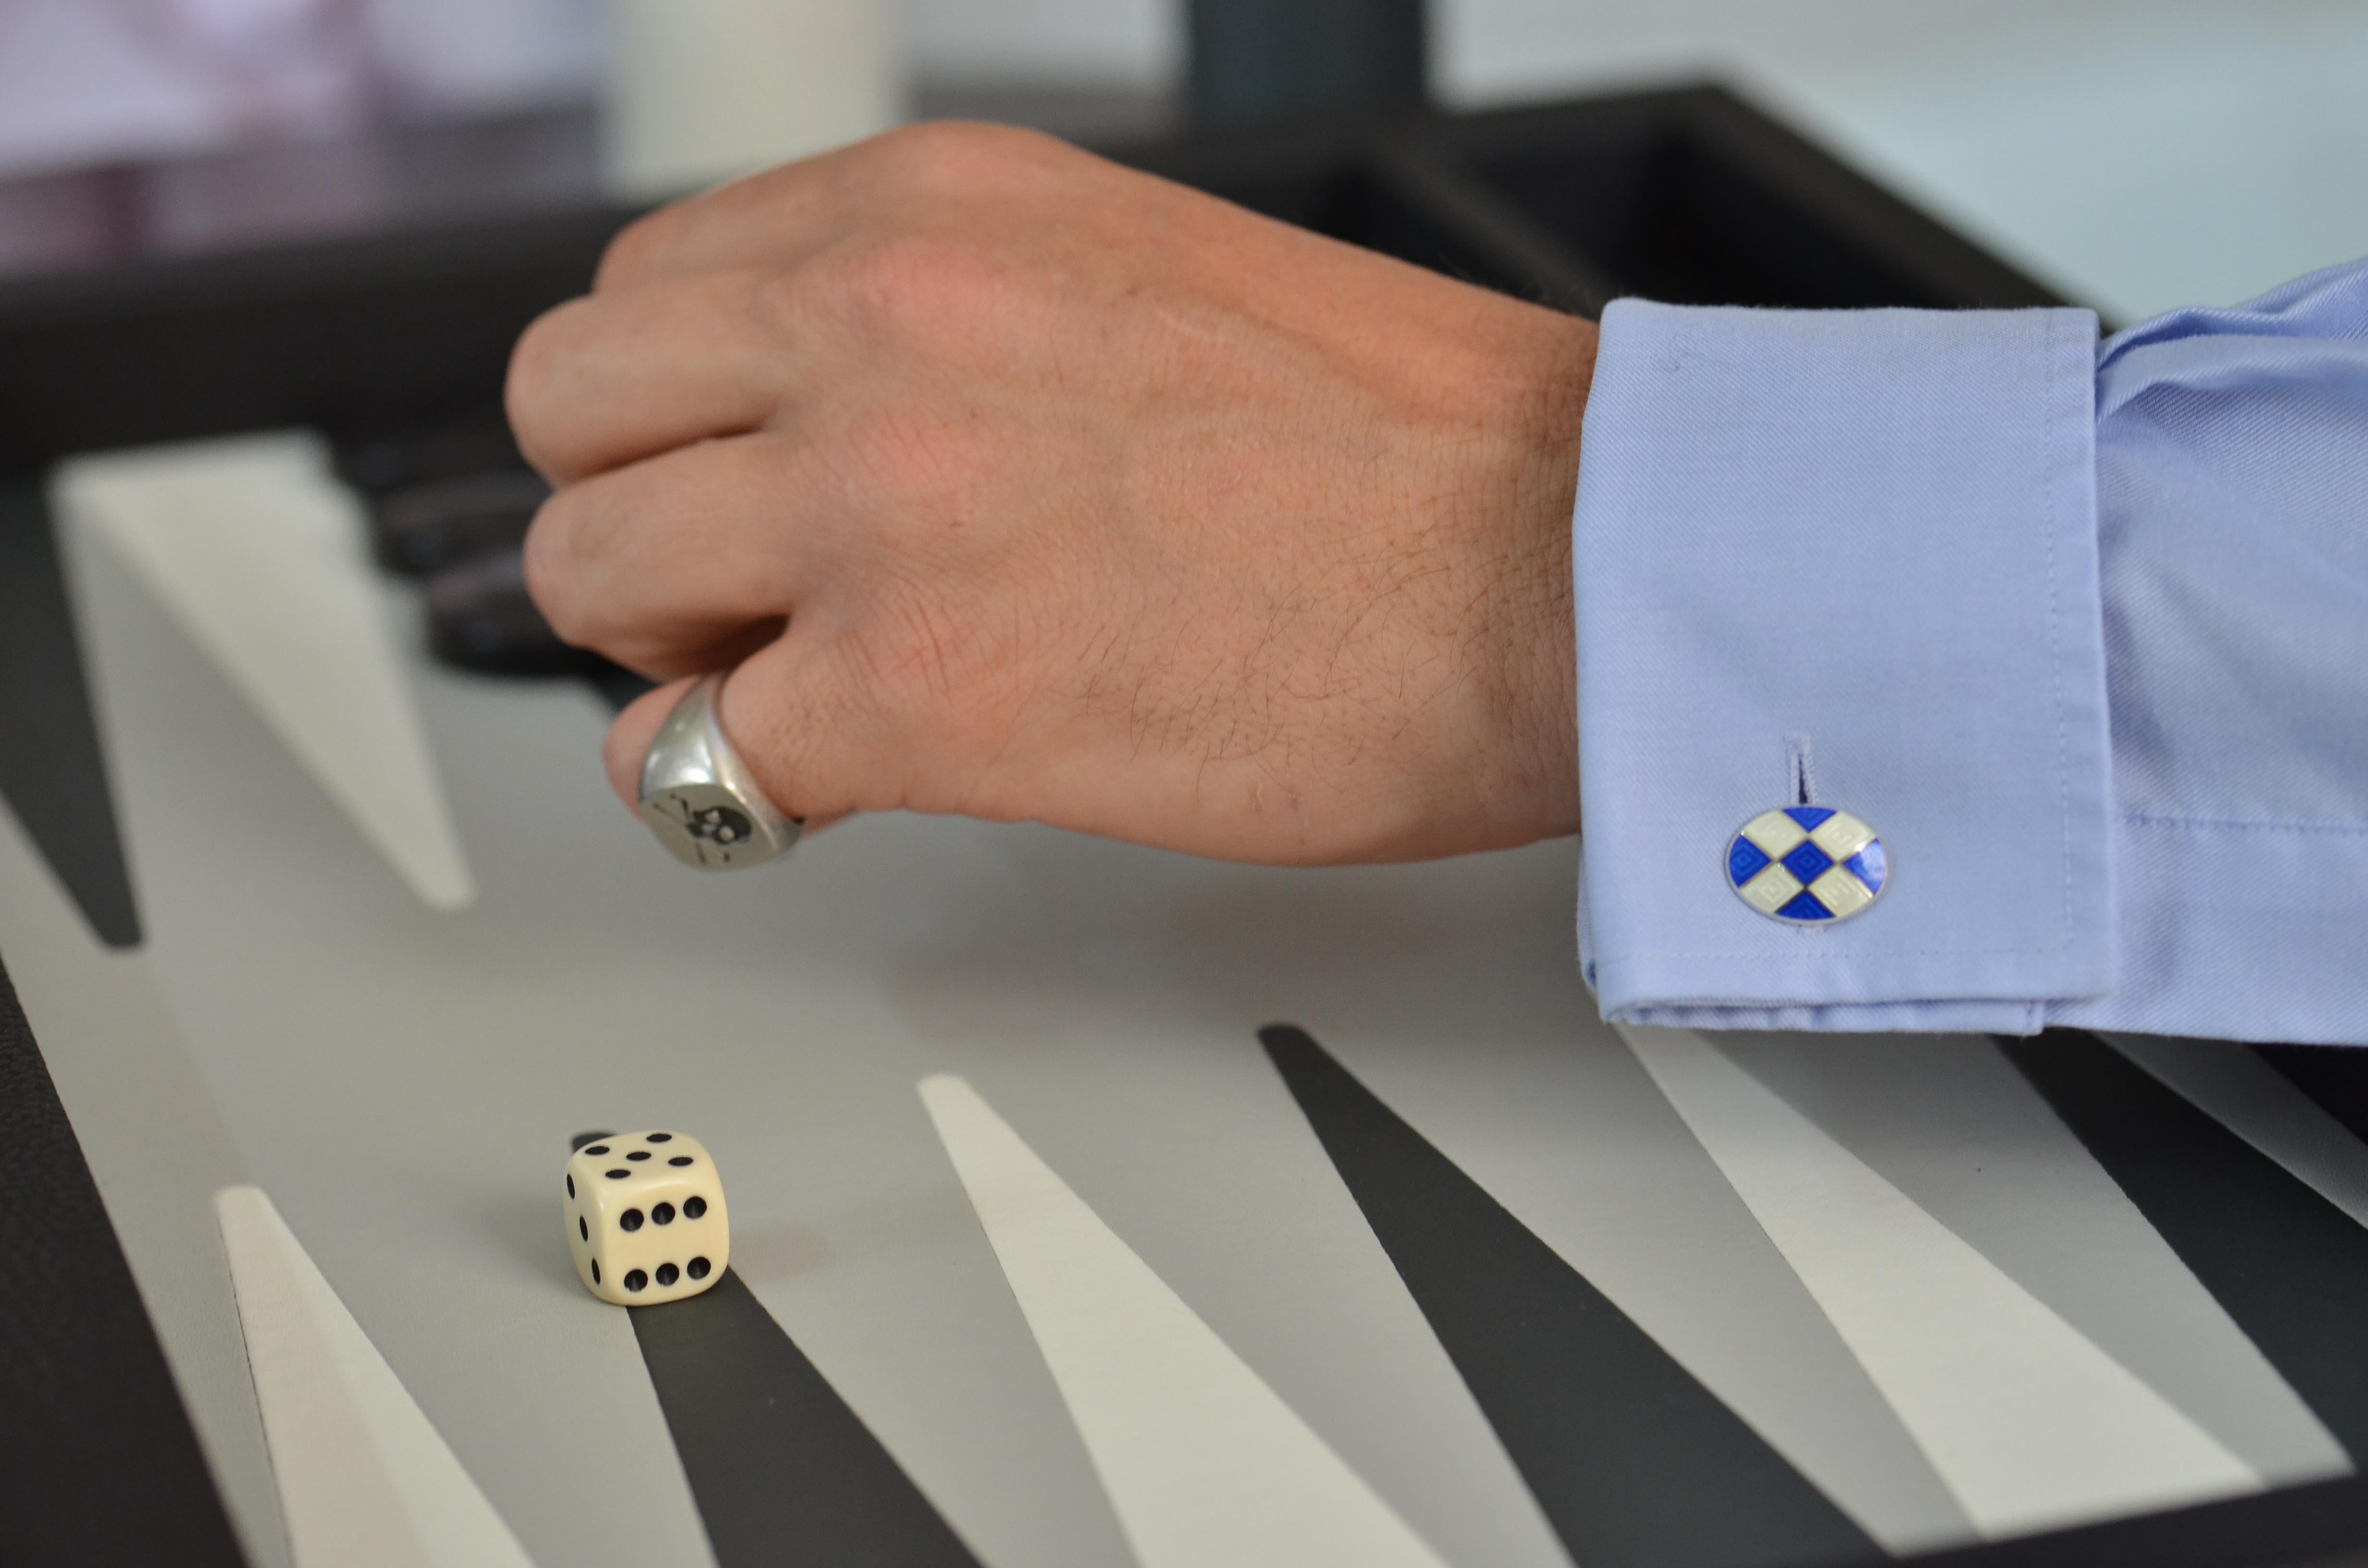 DEAKIN & FRANCIS, Piccadilly Arcade, London

Here at Deakin & Francis we are masters in the art of vitreous enamelling, dating back to the Pharaohs, this is a highly specialised, hand skill.

These sterling silver, oval cufflinks are classic with a